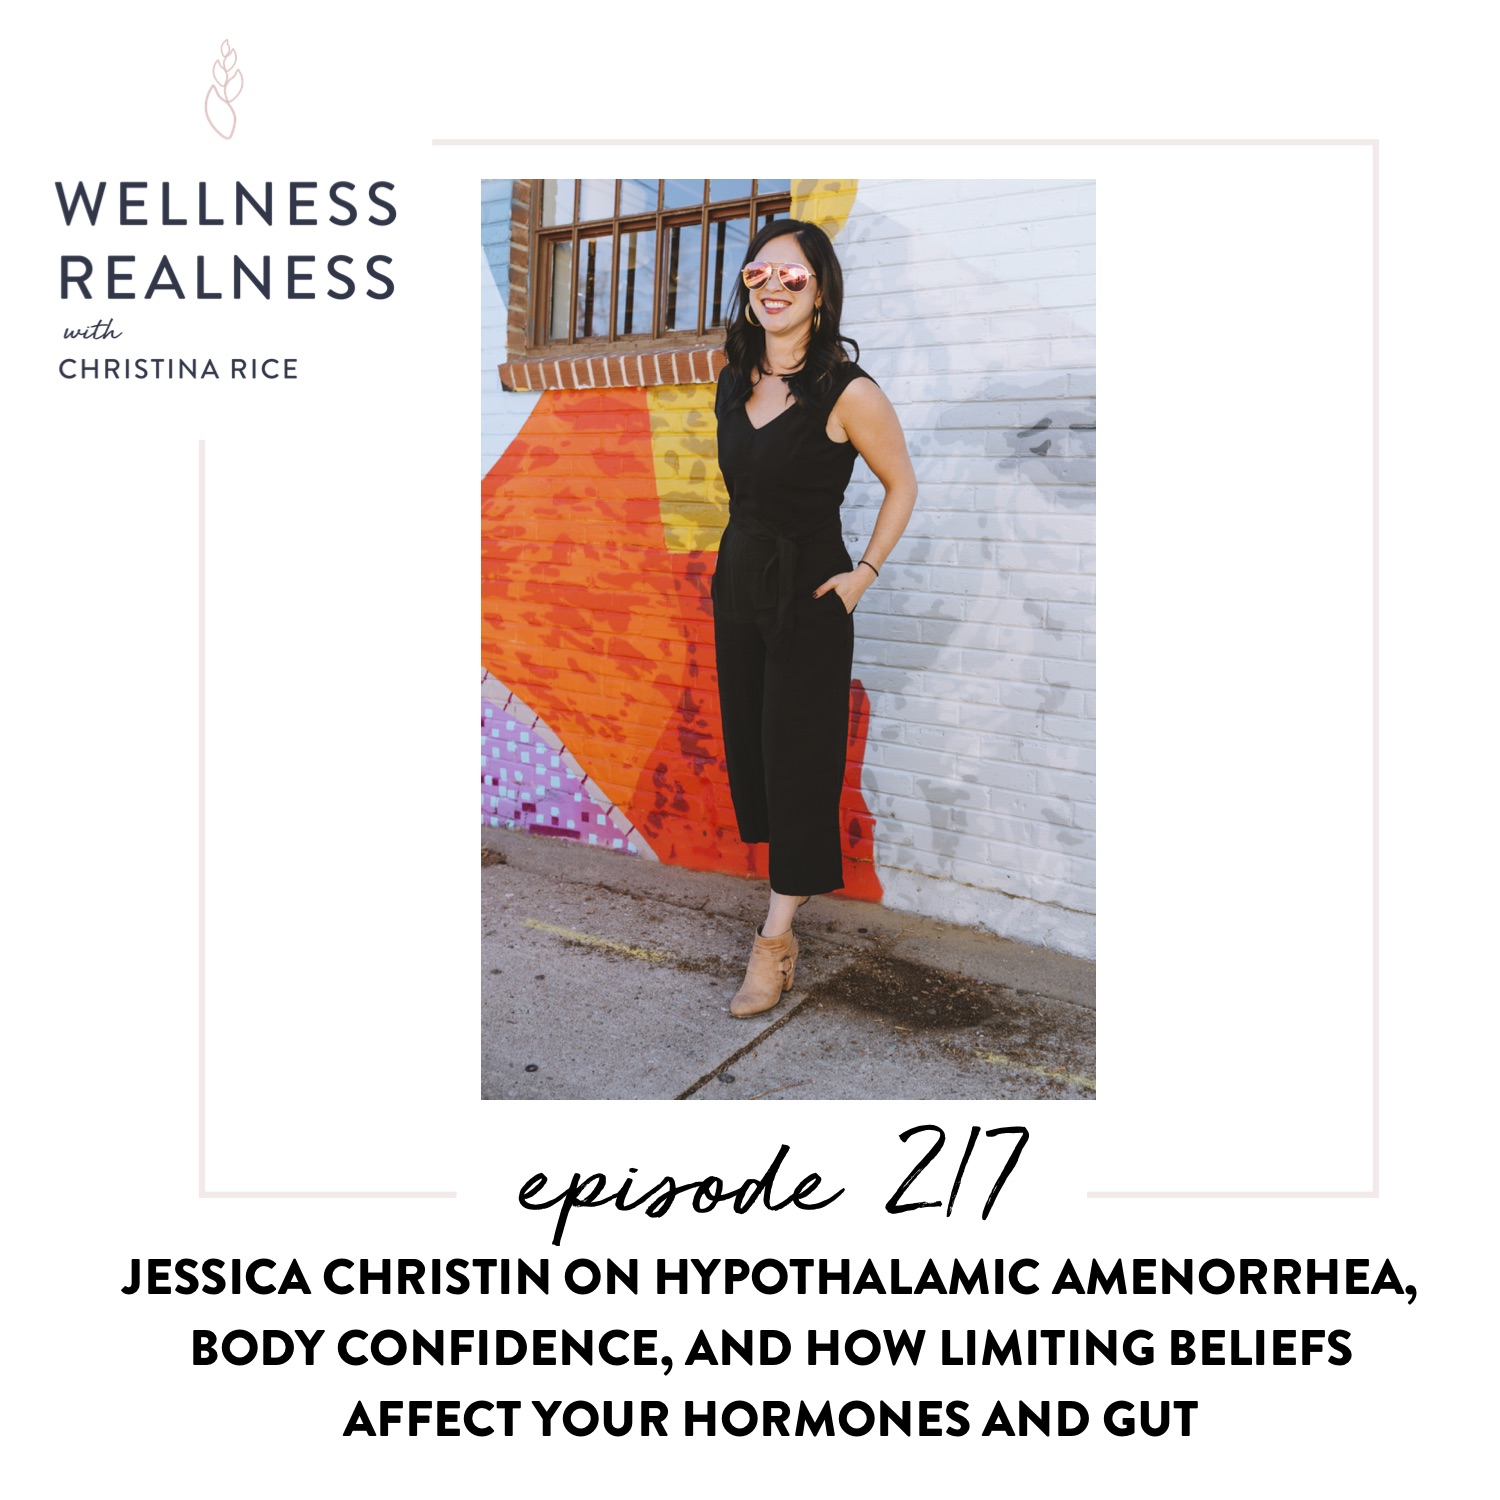 217: Jessica Christin on Hypothalamic Amenorrhea, Body Confidence, and How Limiting Beliefs Affect Your Hormones and Gut